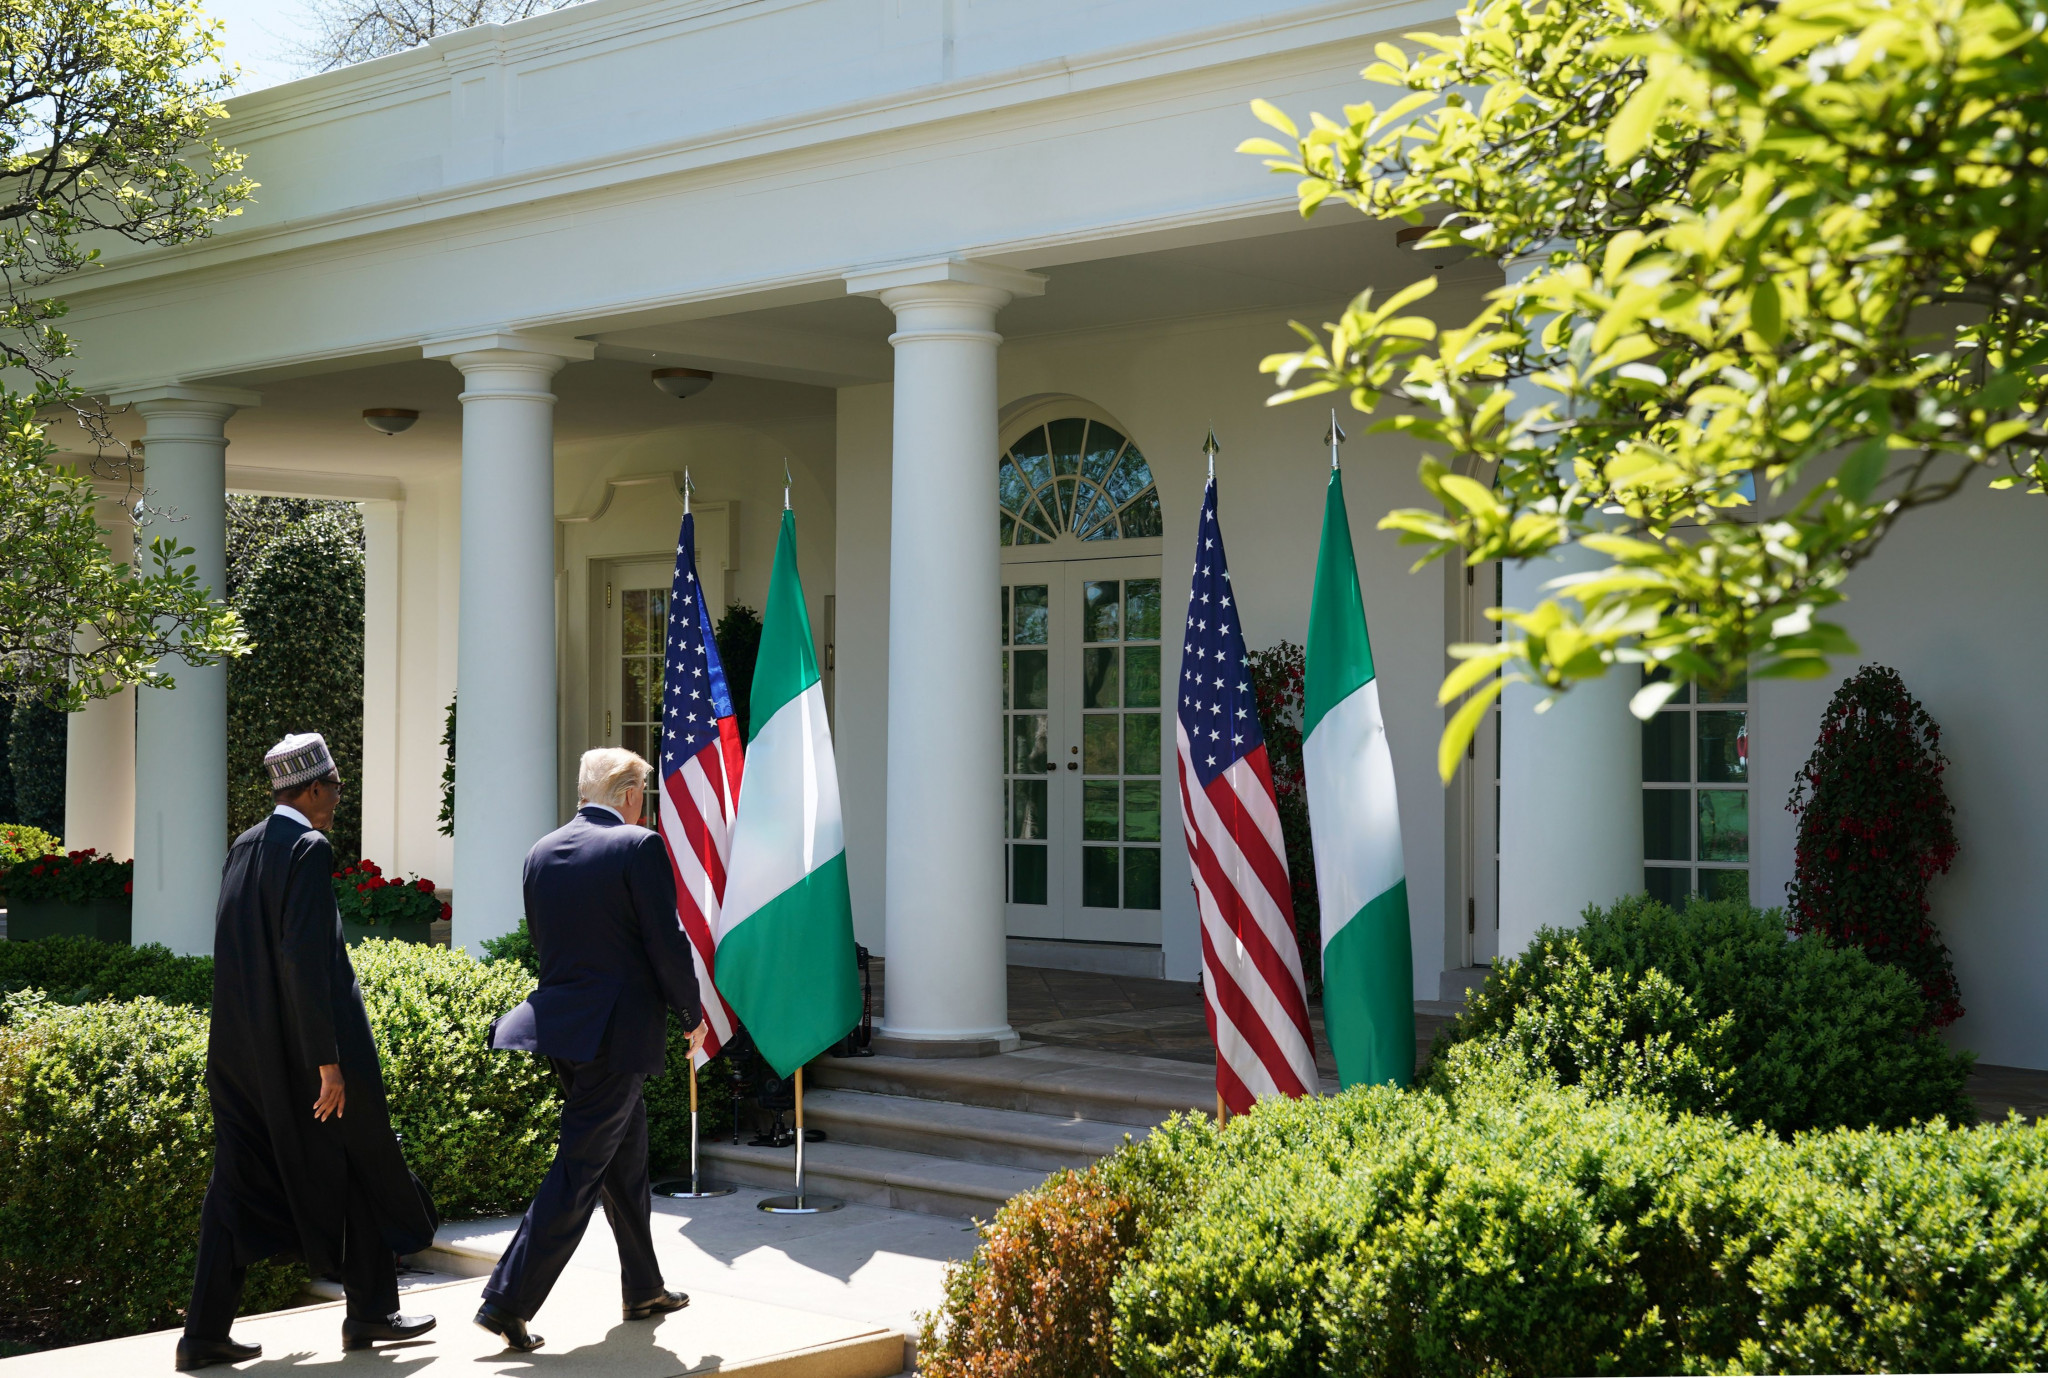 Donald Trump made the comment about the bid process for the 2026 FIFA World Cup during a joint press conference with Nigerian President Muhammadu Buhari at the White House ©Getty Images